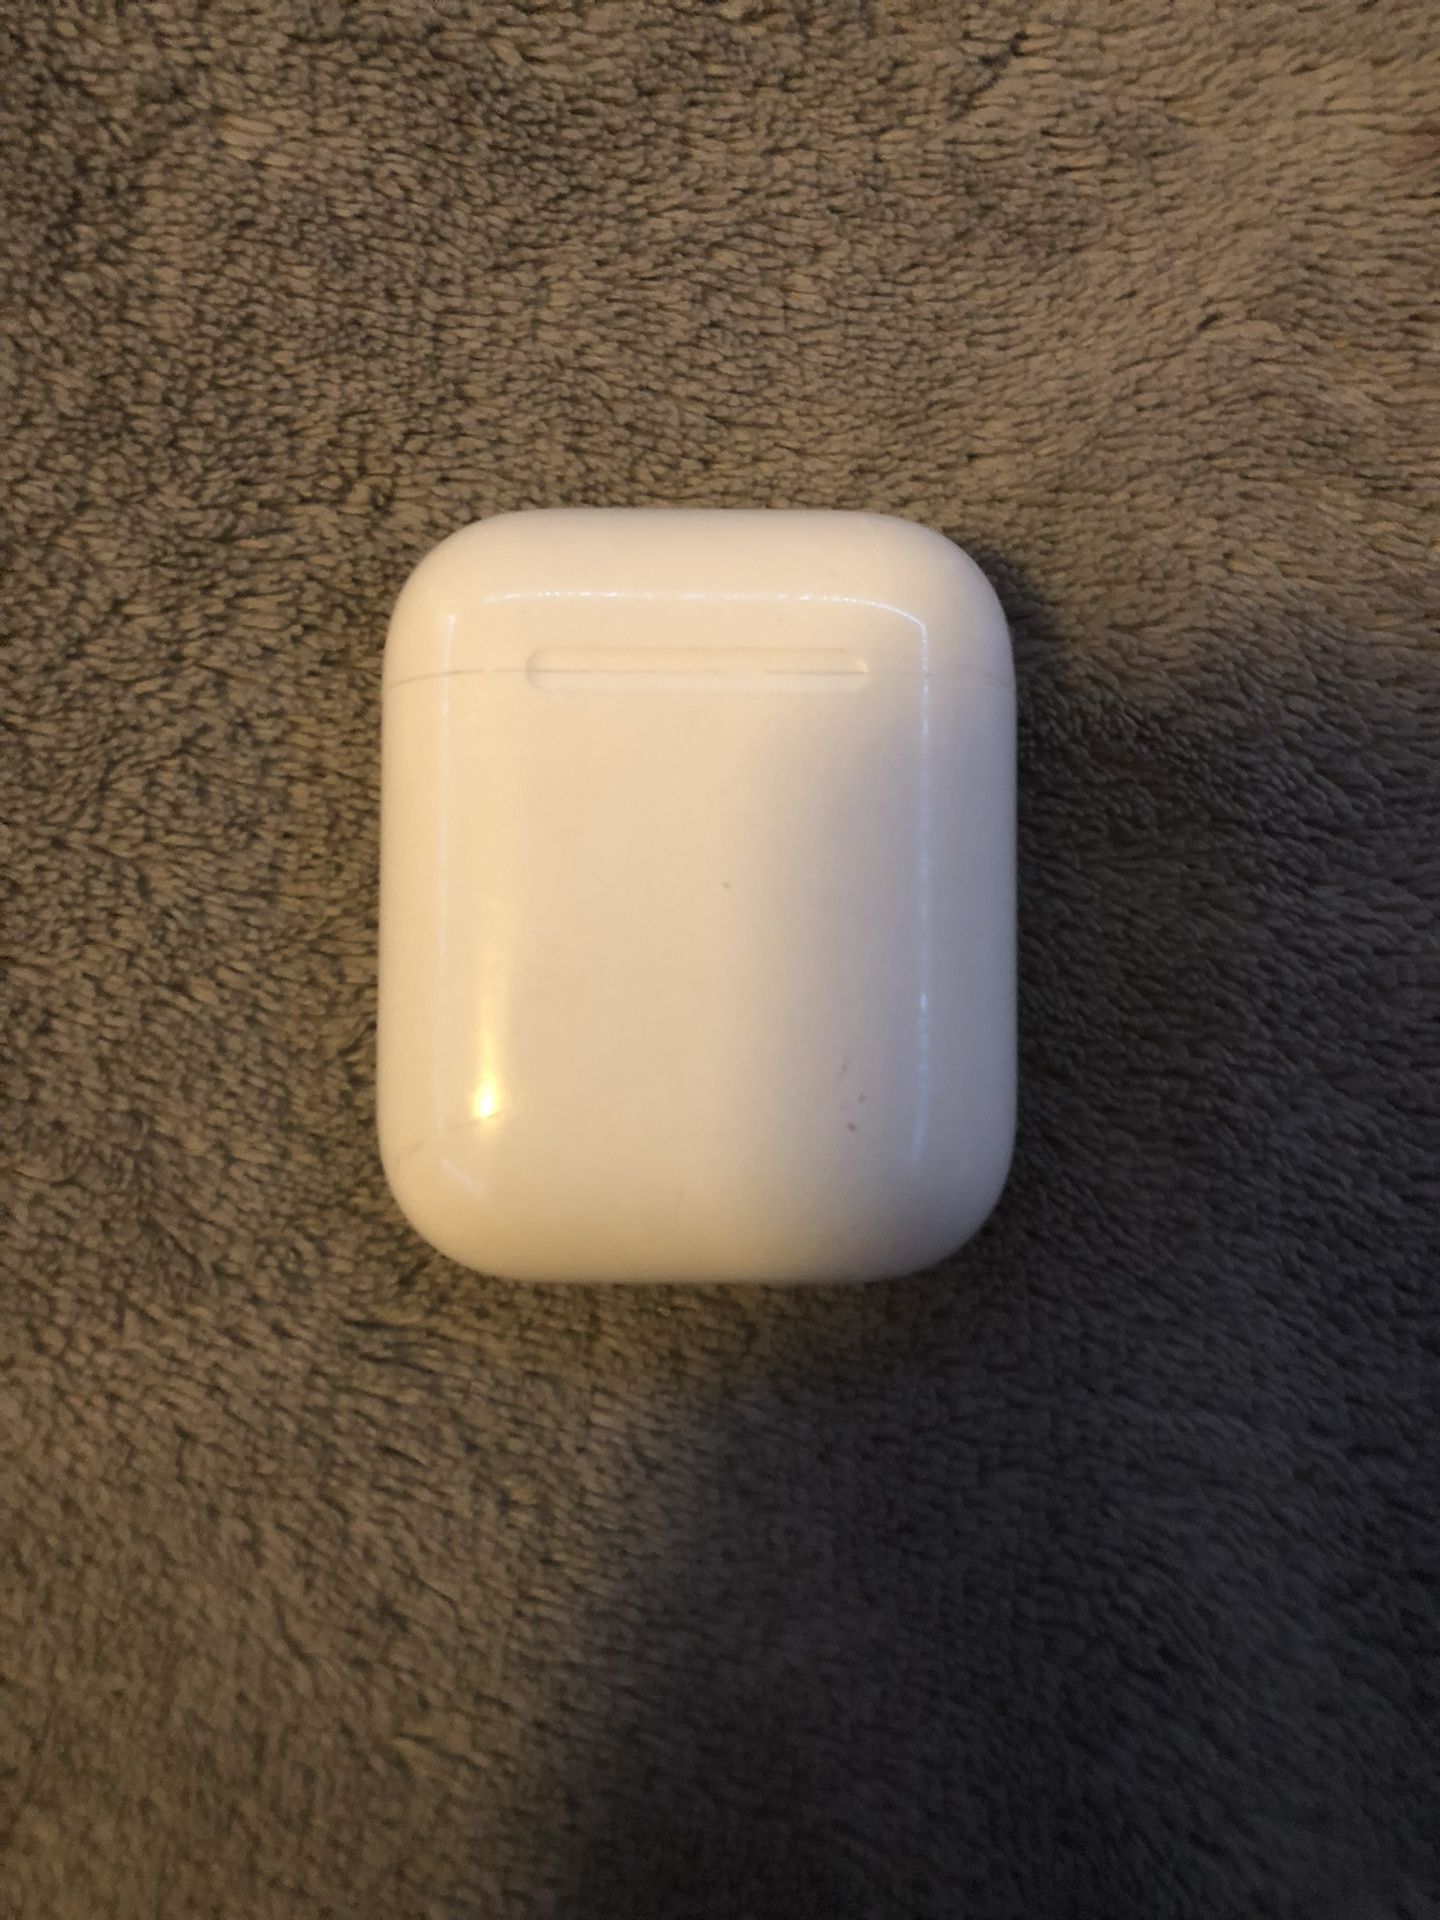 Airpods (Case Only)